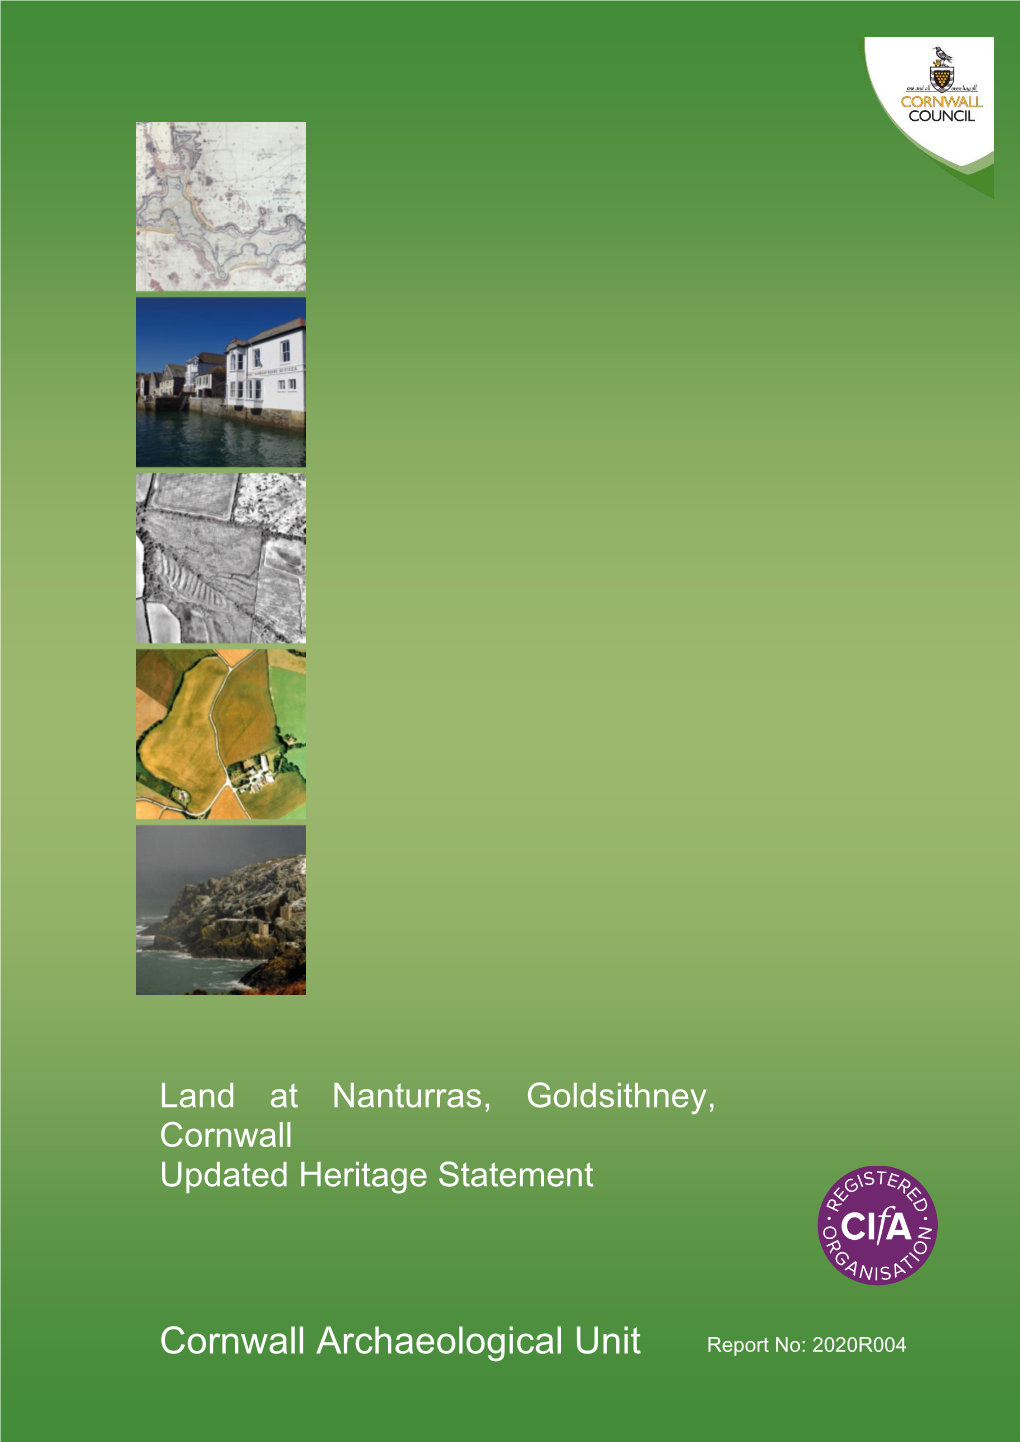 Cornwall Archaeological Unit Report No: 2020R004 2020R004 Land at Nanturras, Goldsithney, Cornwall, Updated Heritage Statement